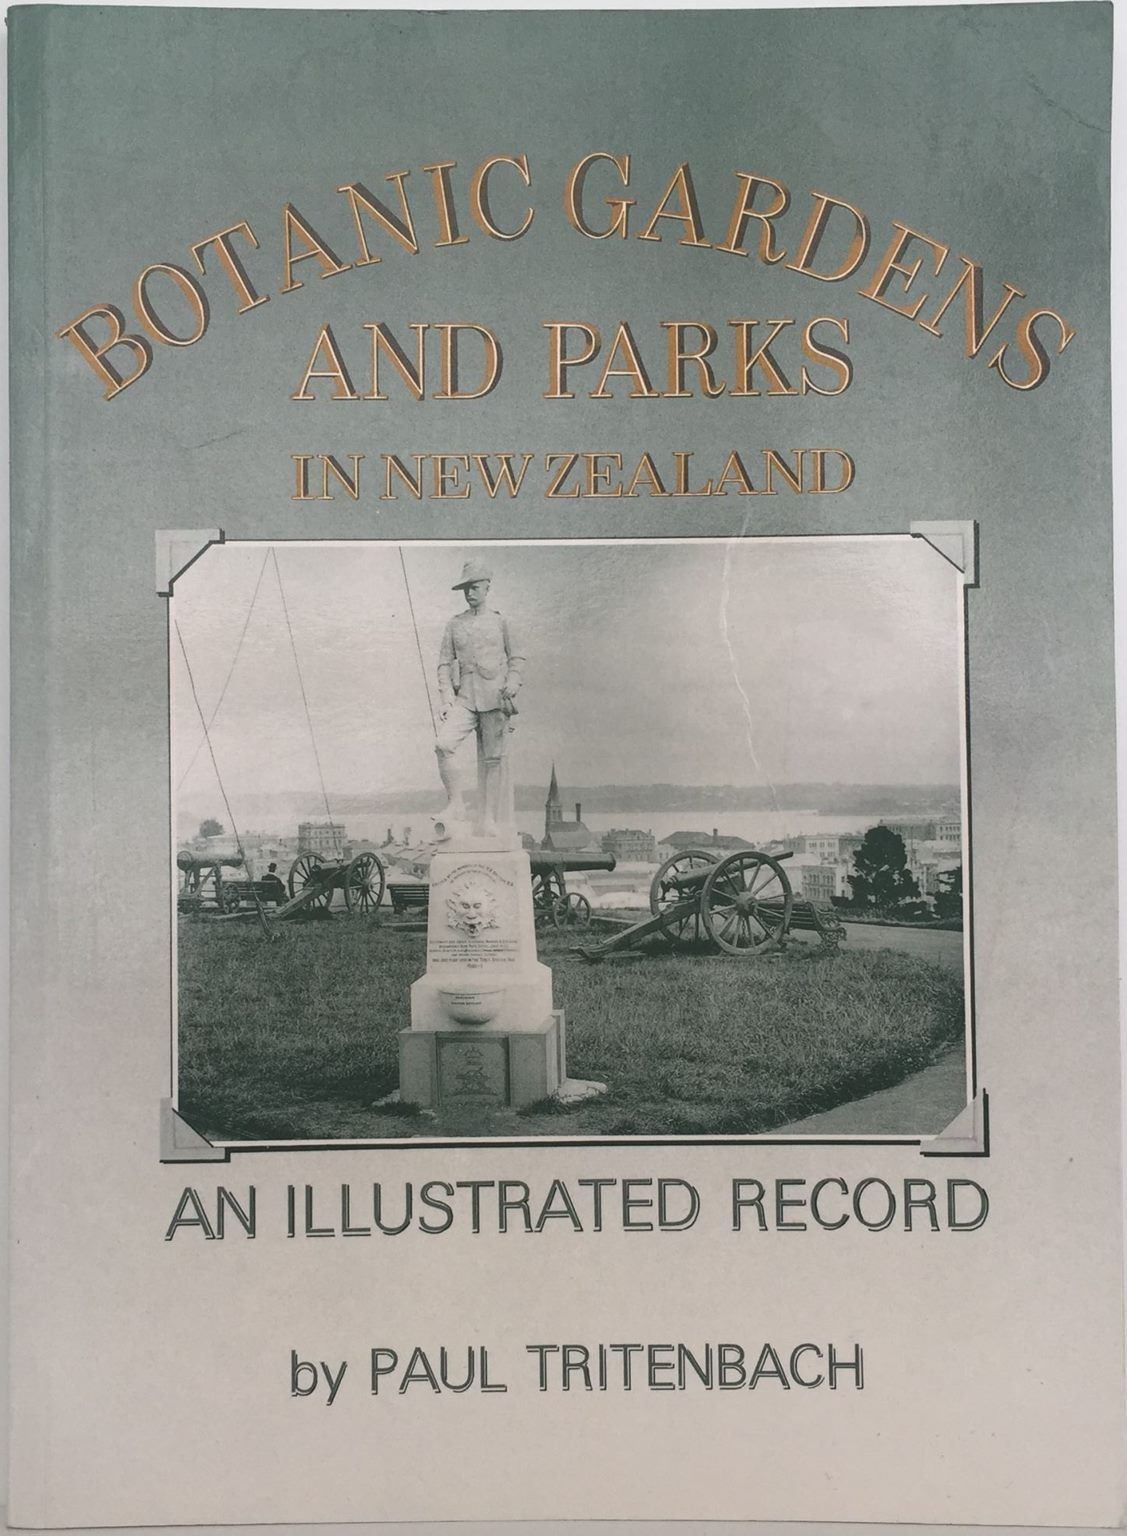 BOTANIC GARDENS AND PARKS IN NEW ZEALAND: An Illustrated Record